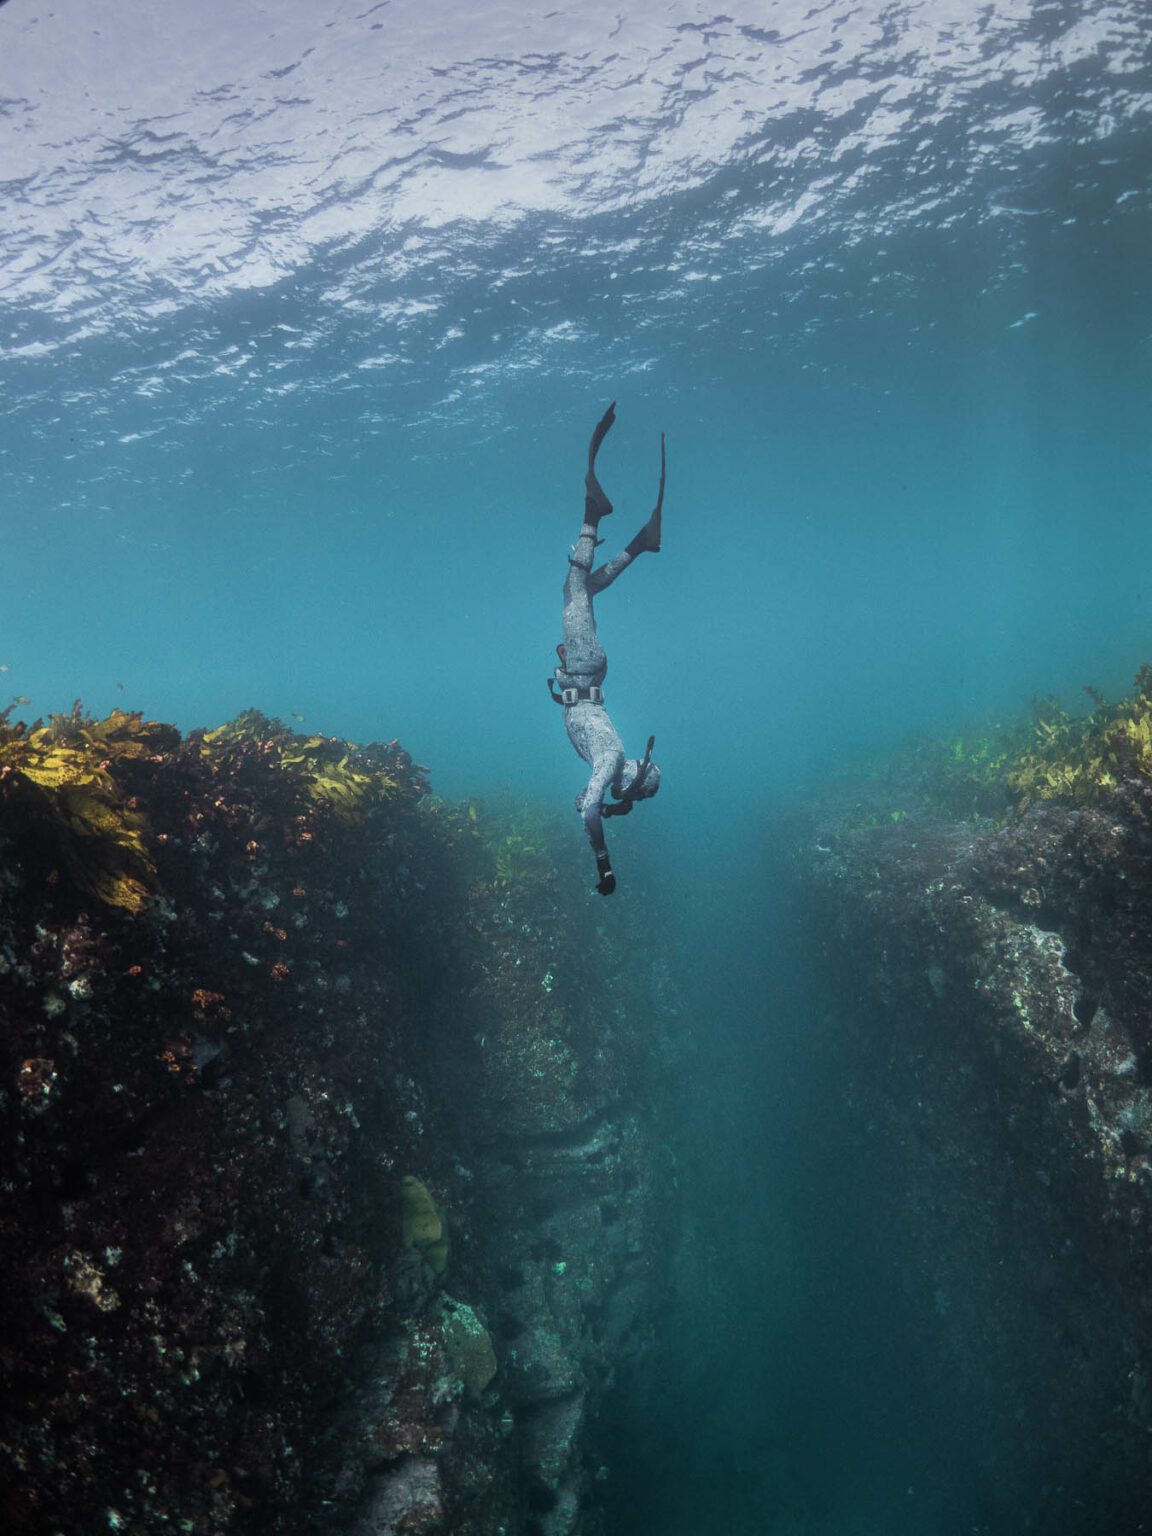 Wave 2 Freediving Course Sydney & Central Coast | Freediving Central